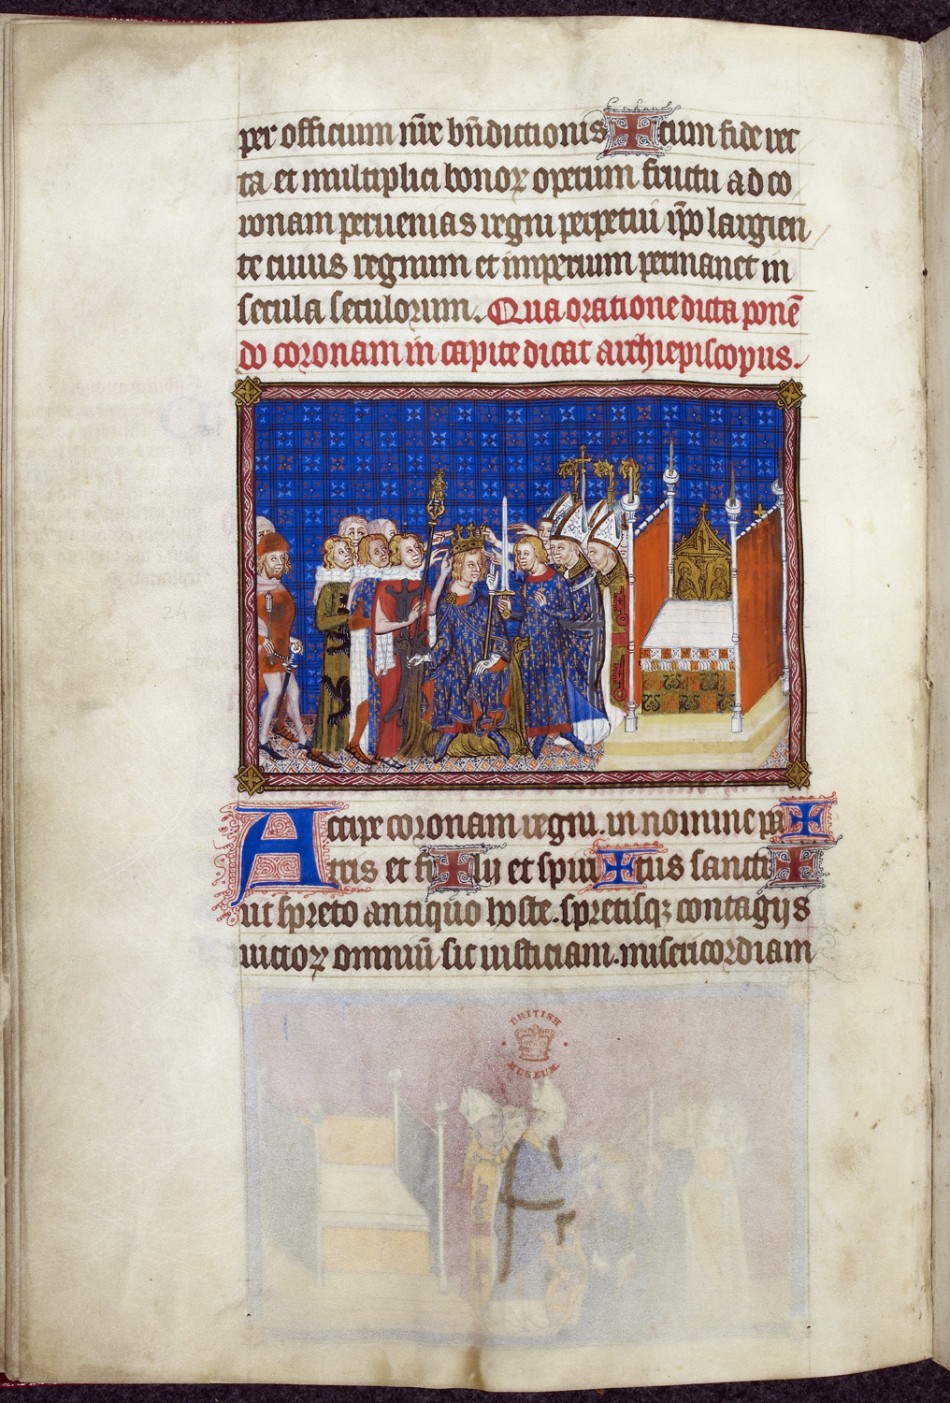 Royal Exhibition Of Medieval Manuscripts Opens At British Library